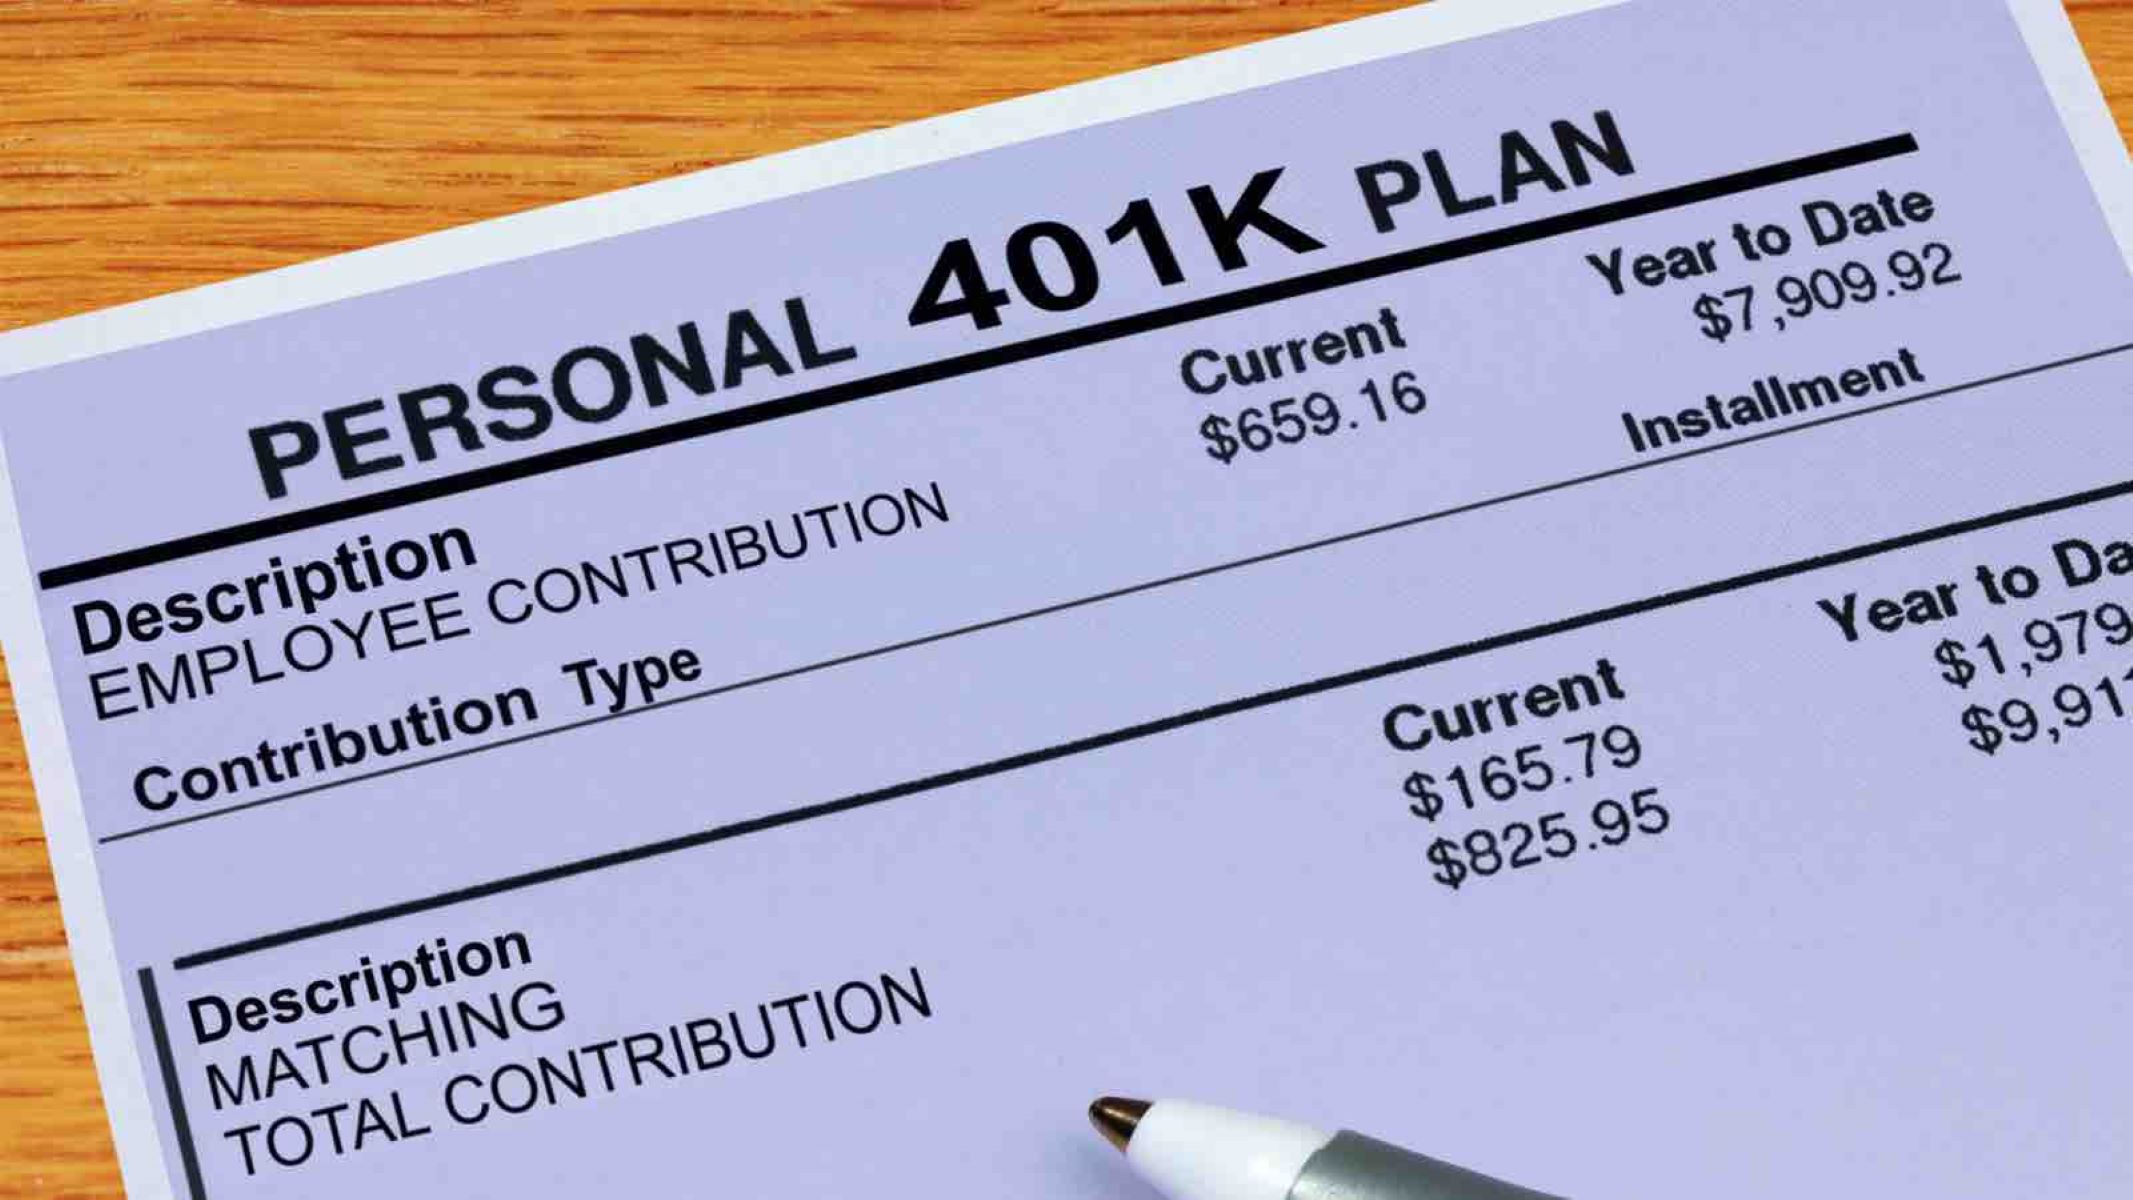 How To Change My 401K Contribution